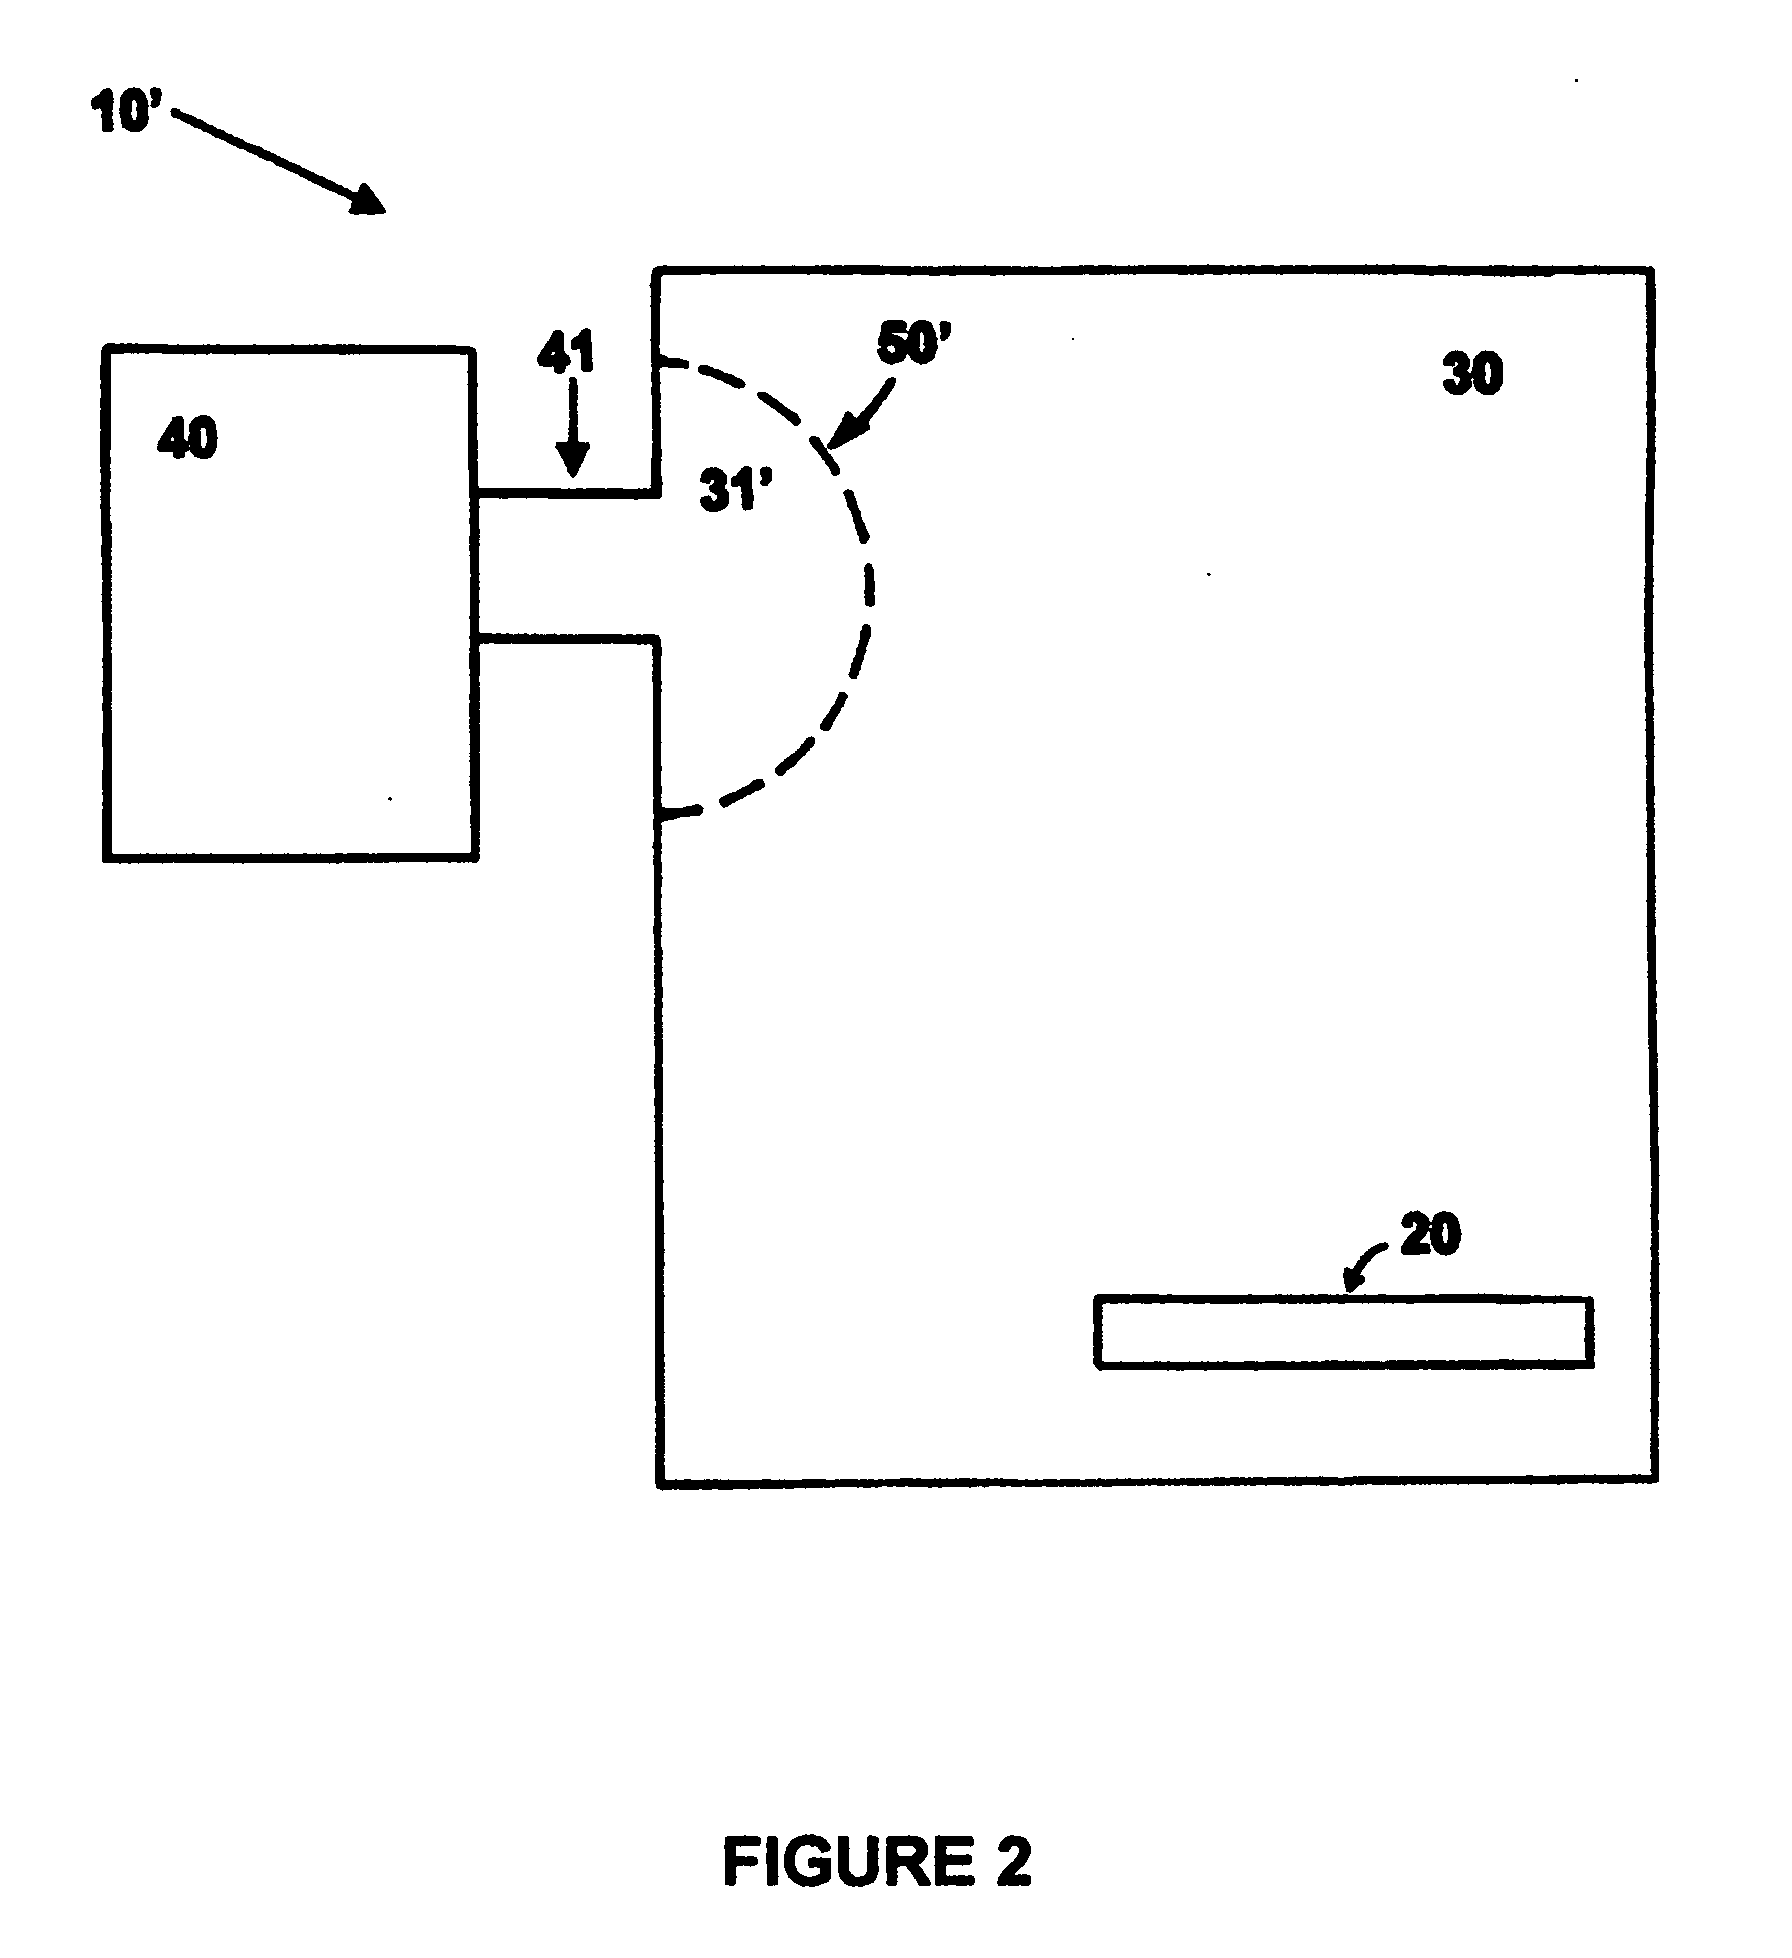 Apparatus and method for microwave processing of materials